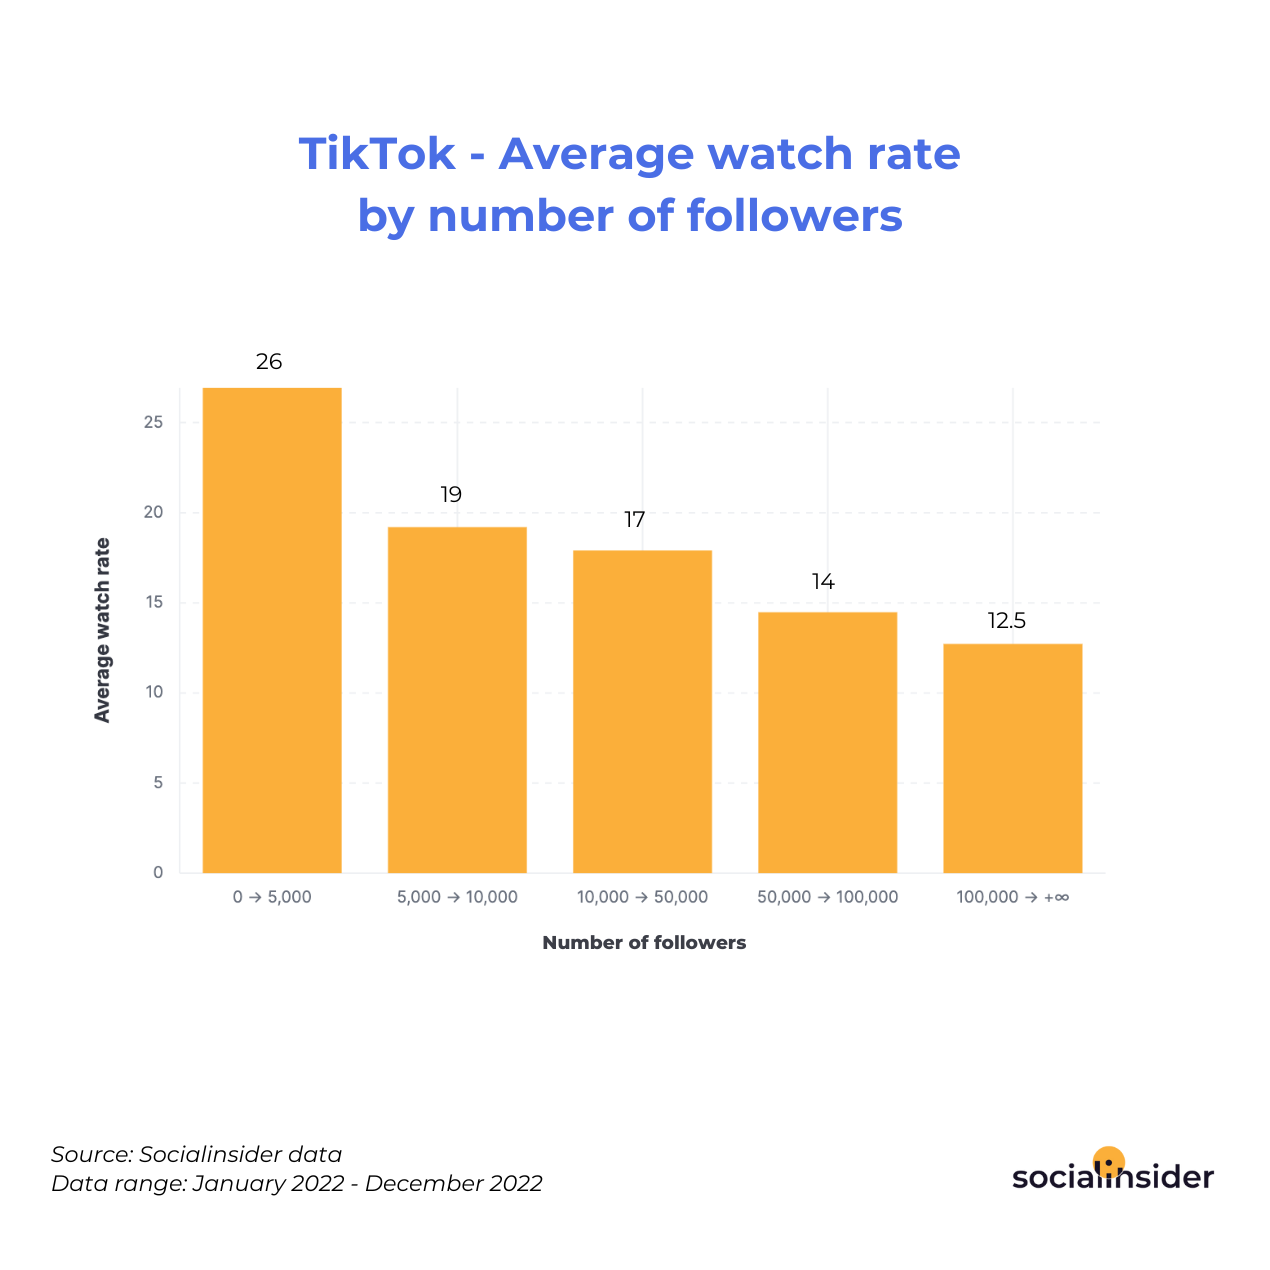 TikTok - Average watch rate by number of followers